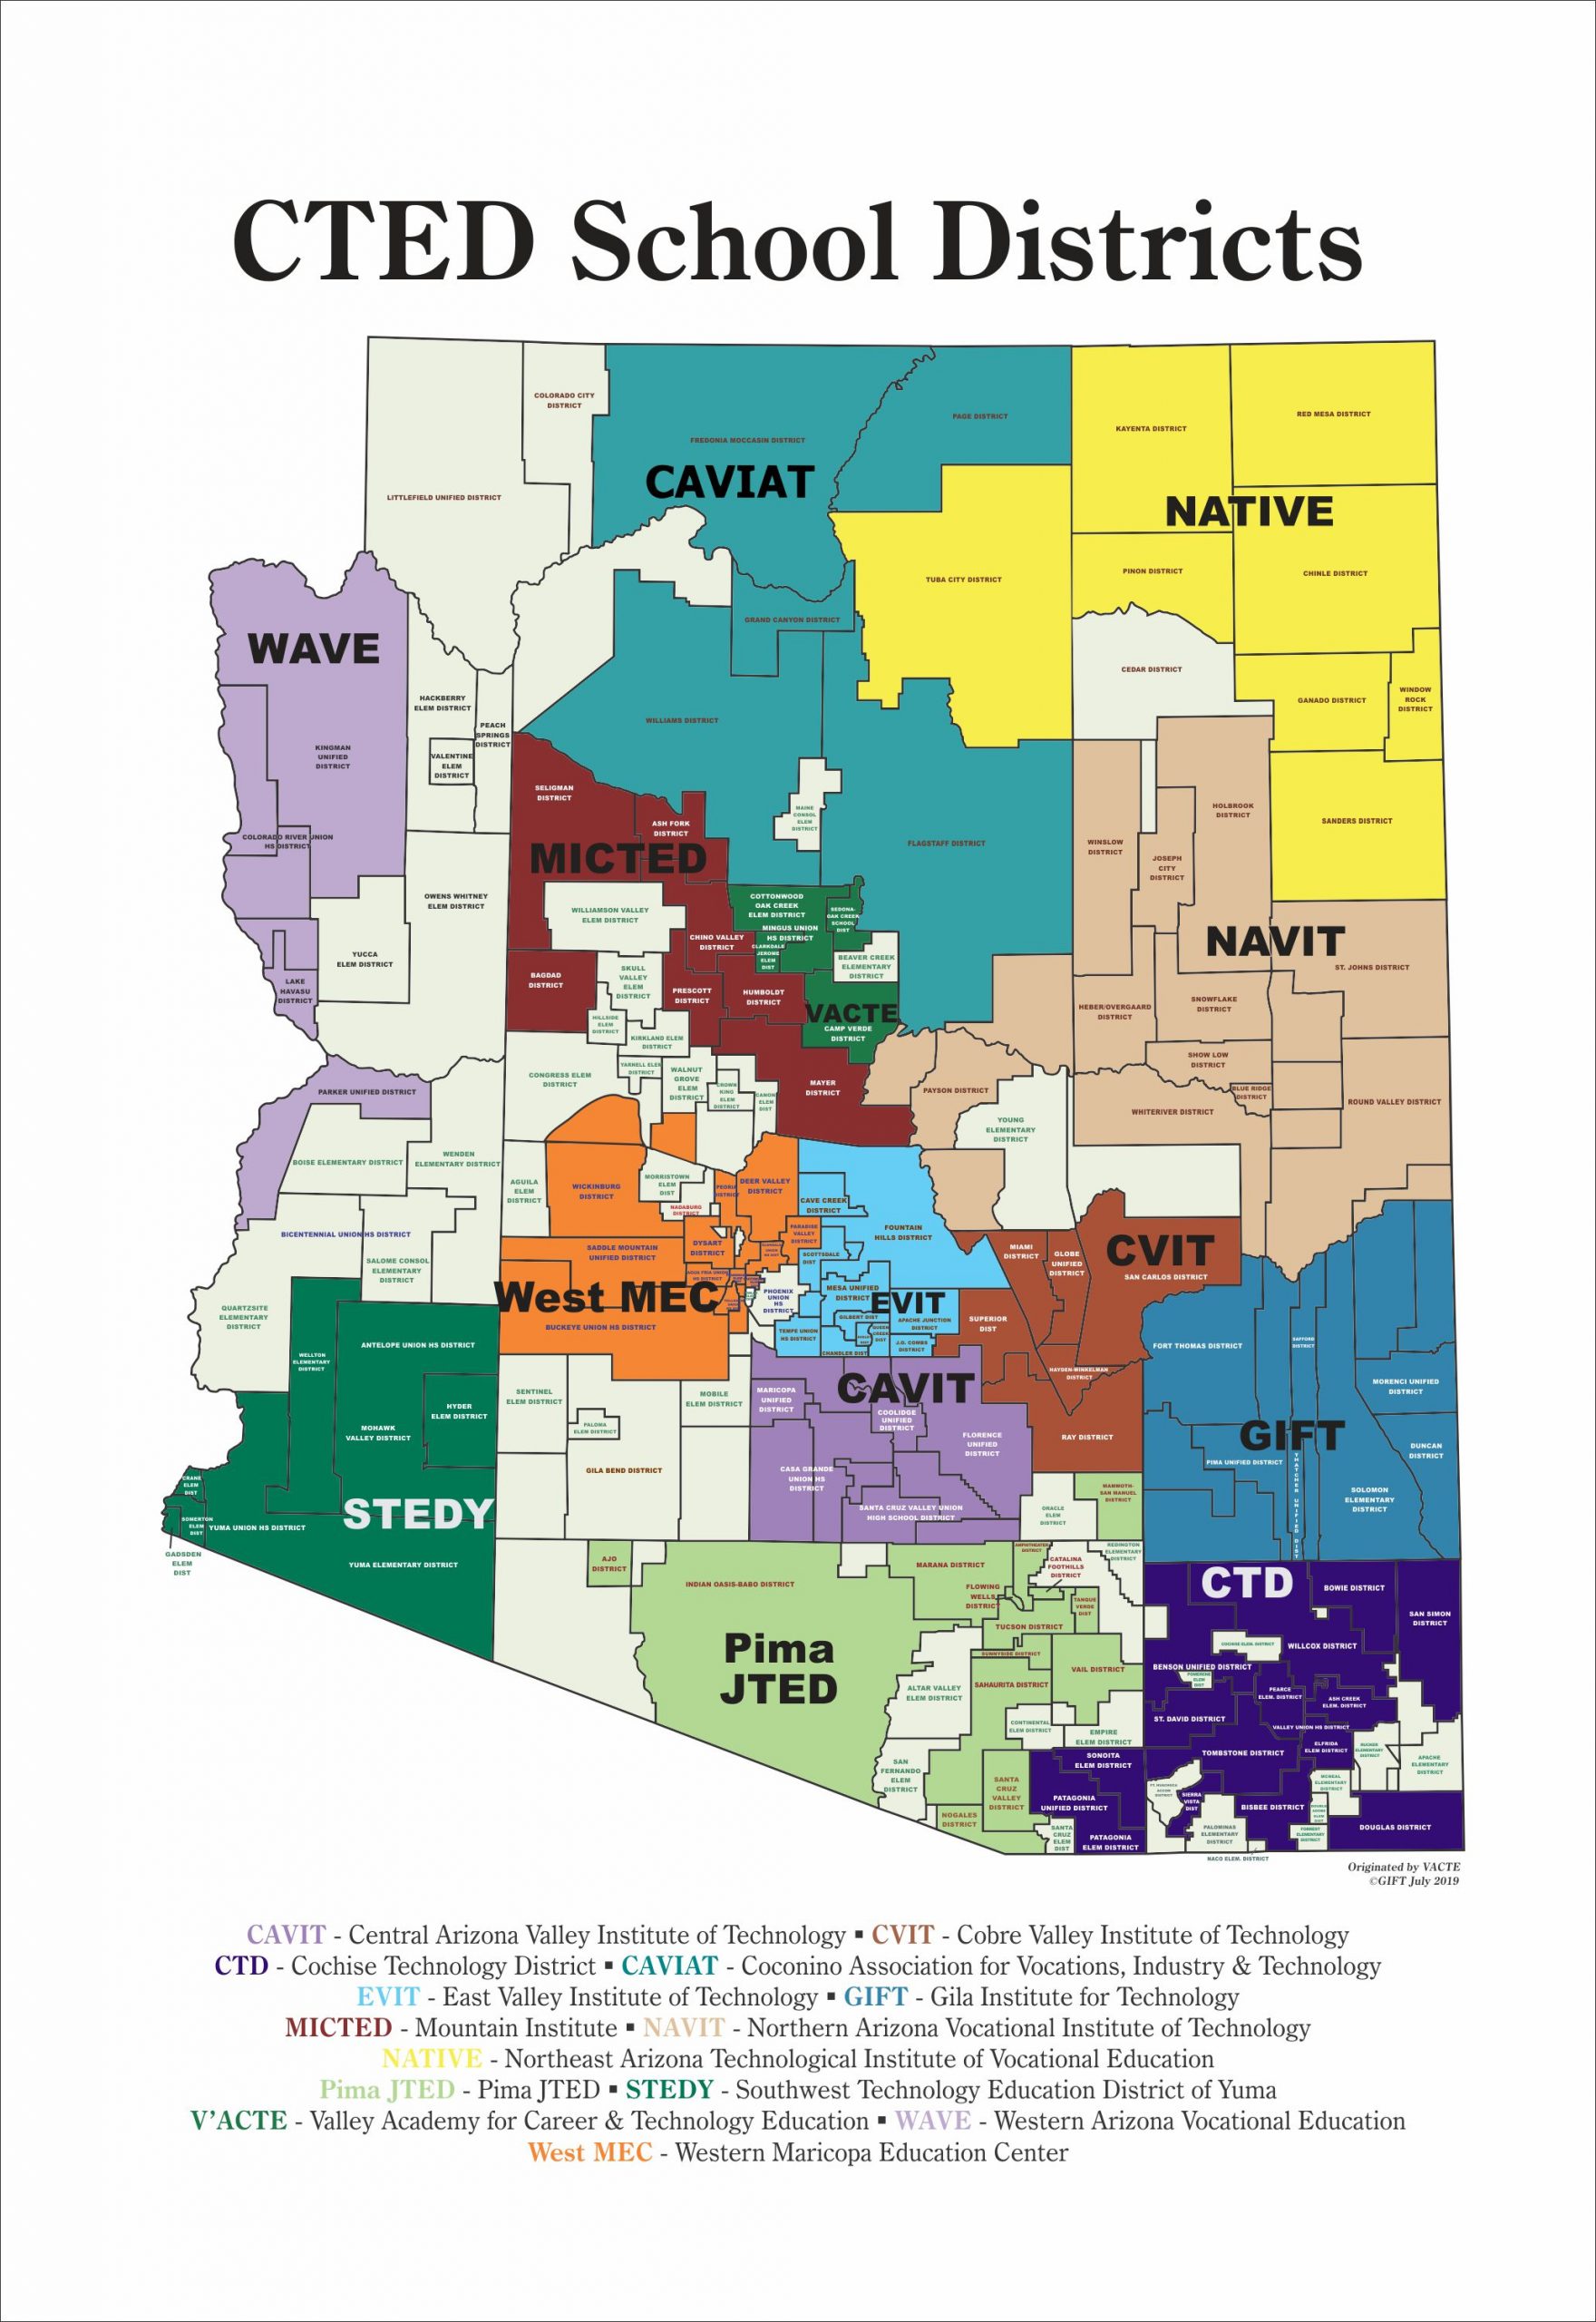 CTED School District map